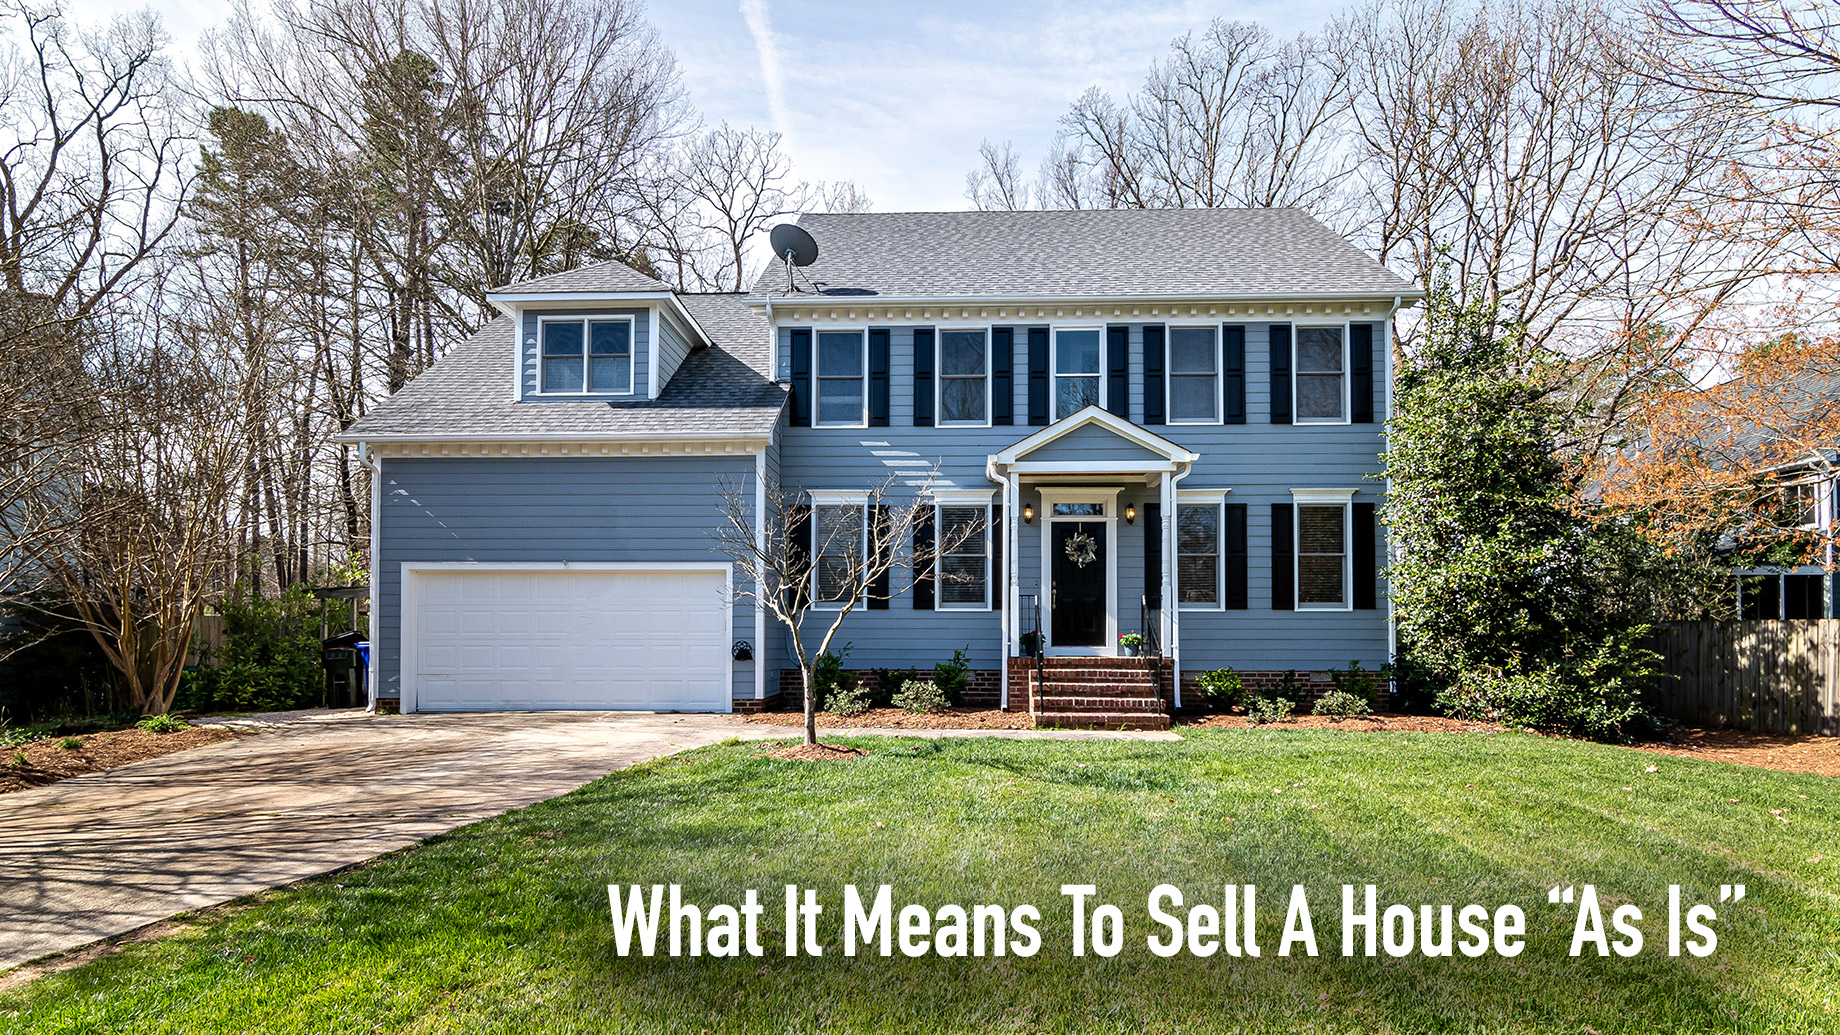 What It Means To Sell A House “As Is”